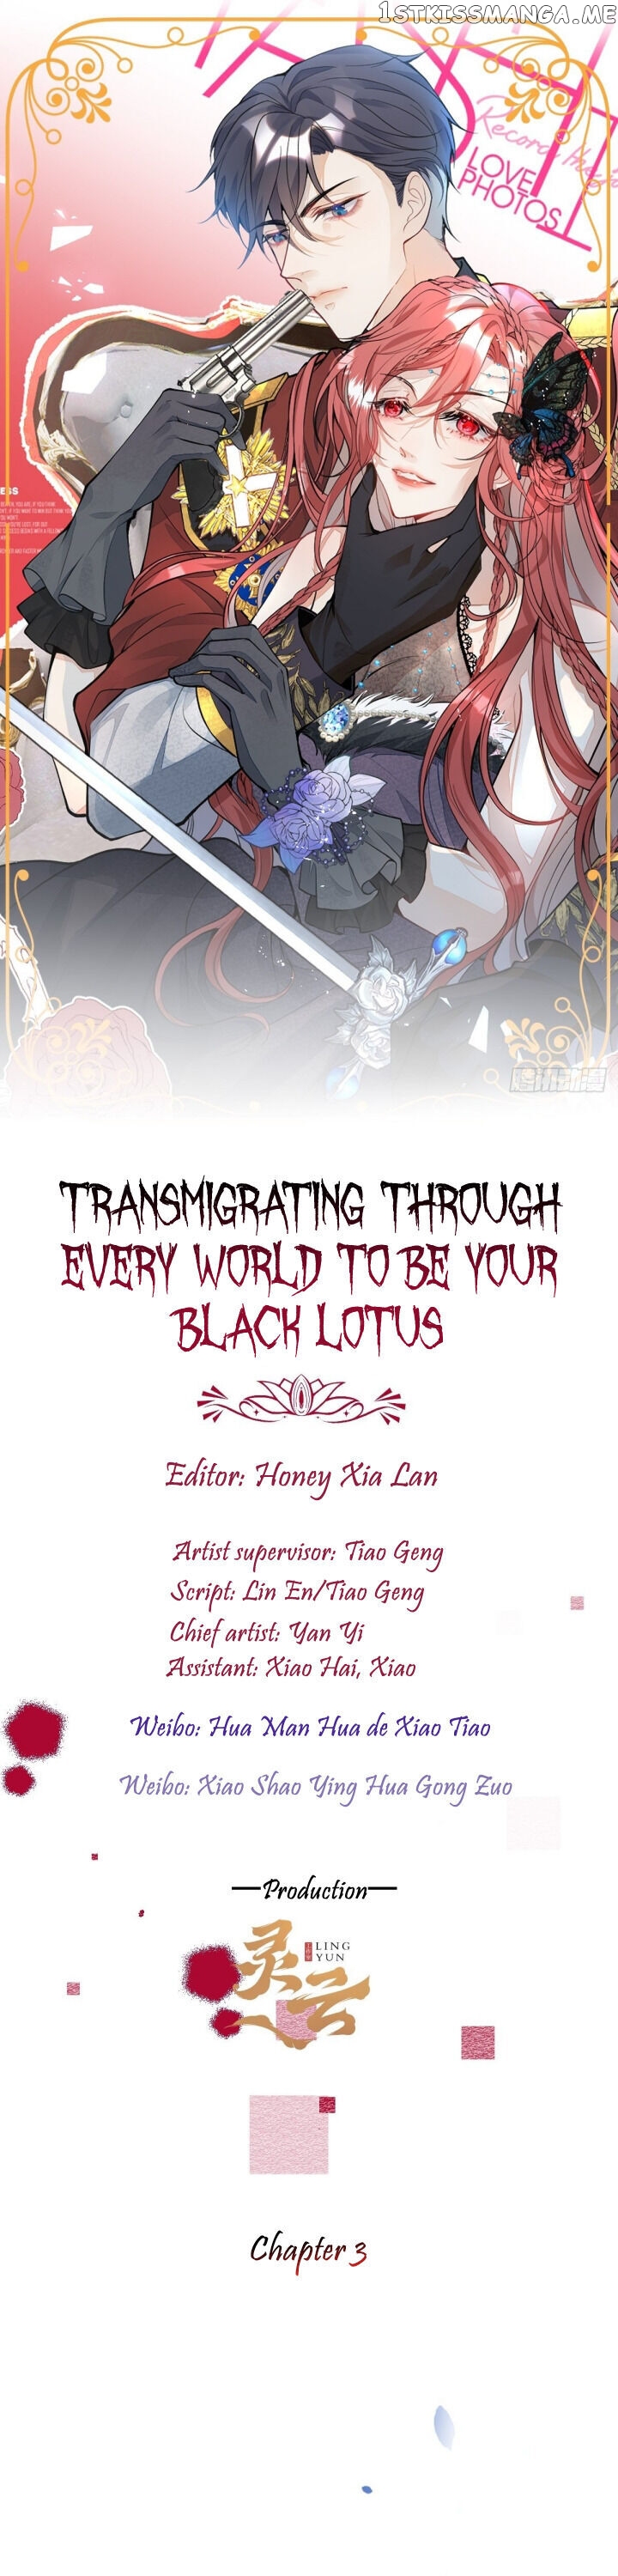 Transmigrating Through Every World To Be Your Black Lotus chapter 3